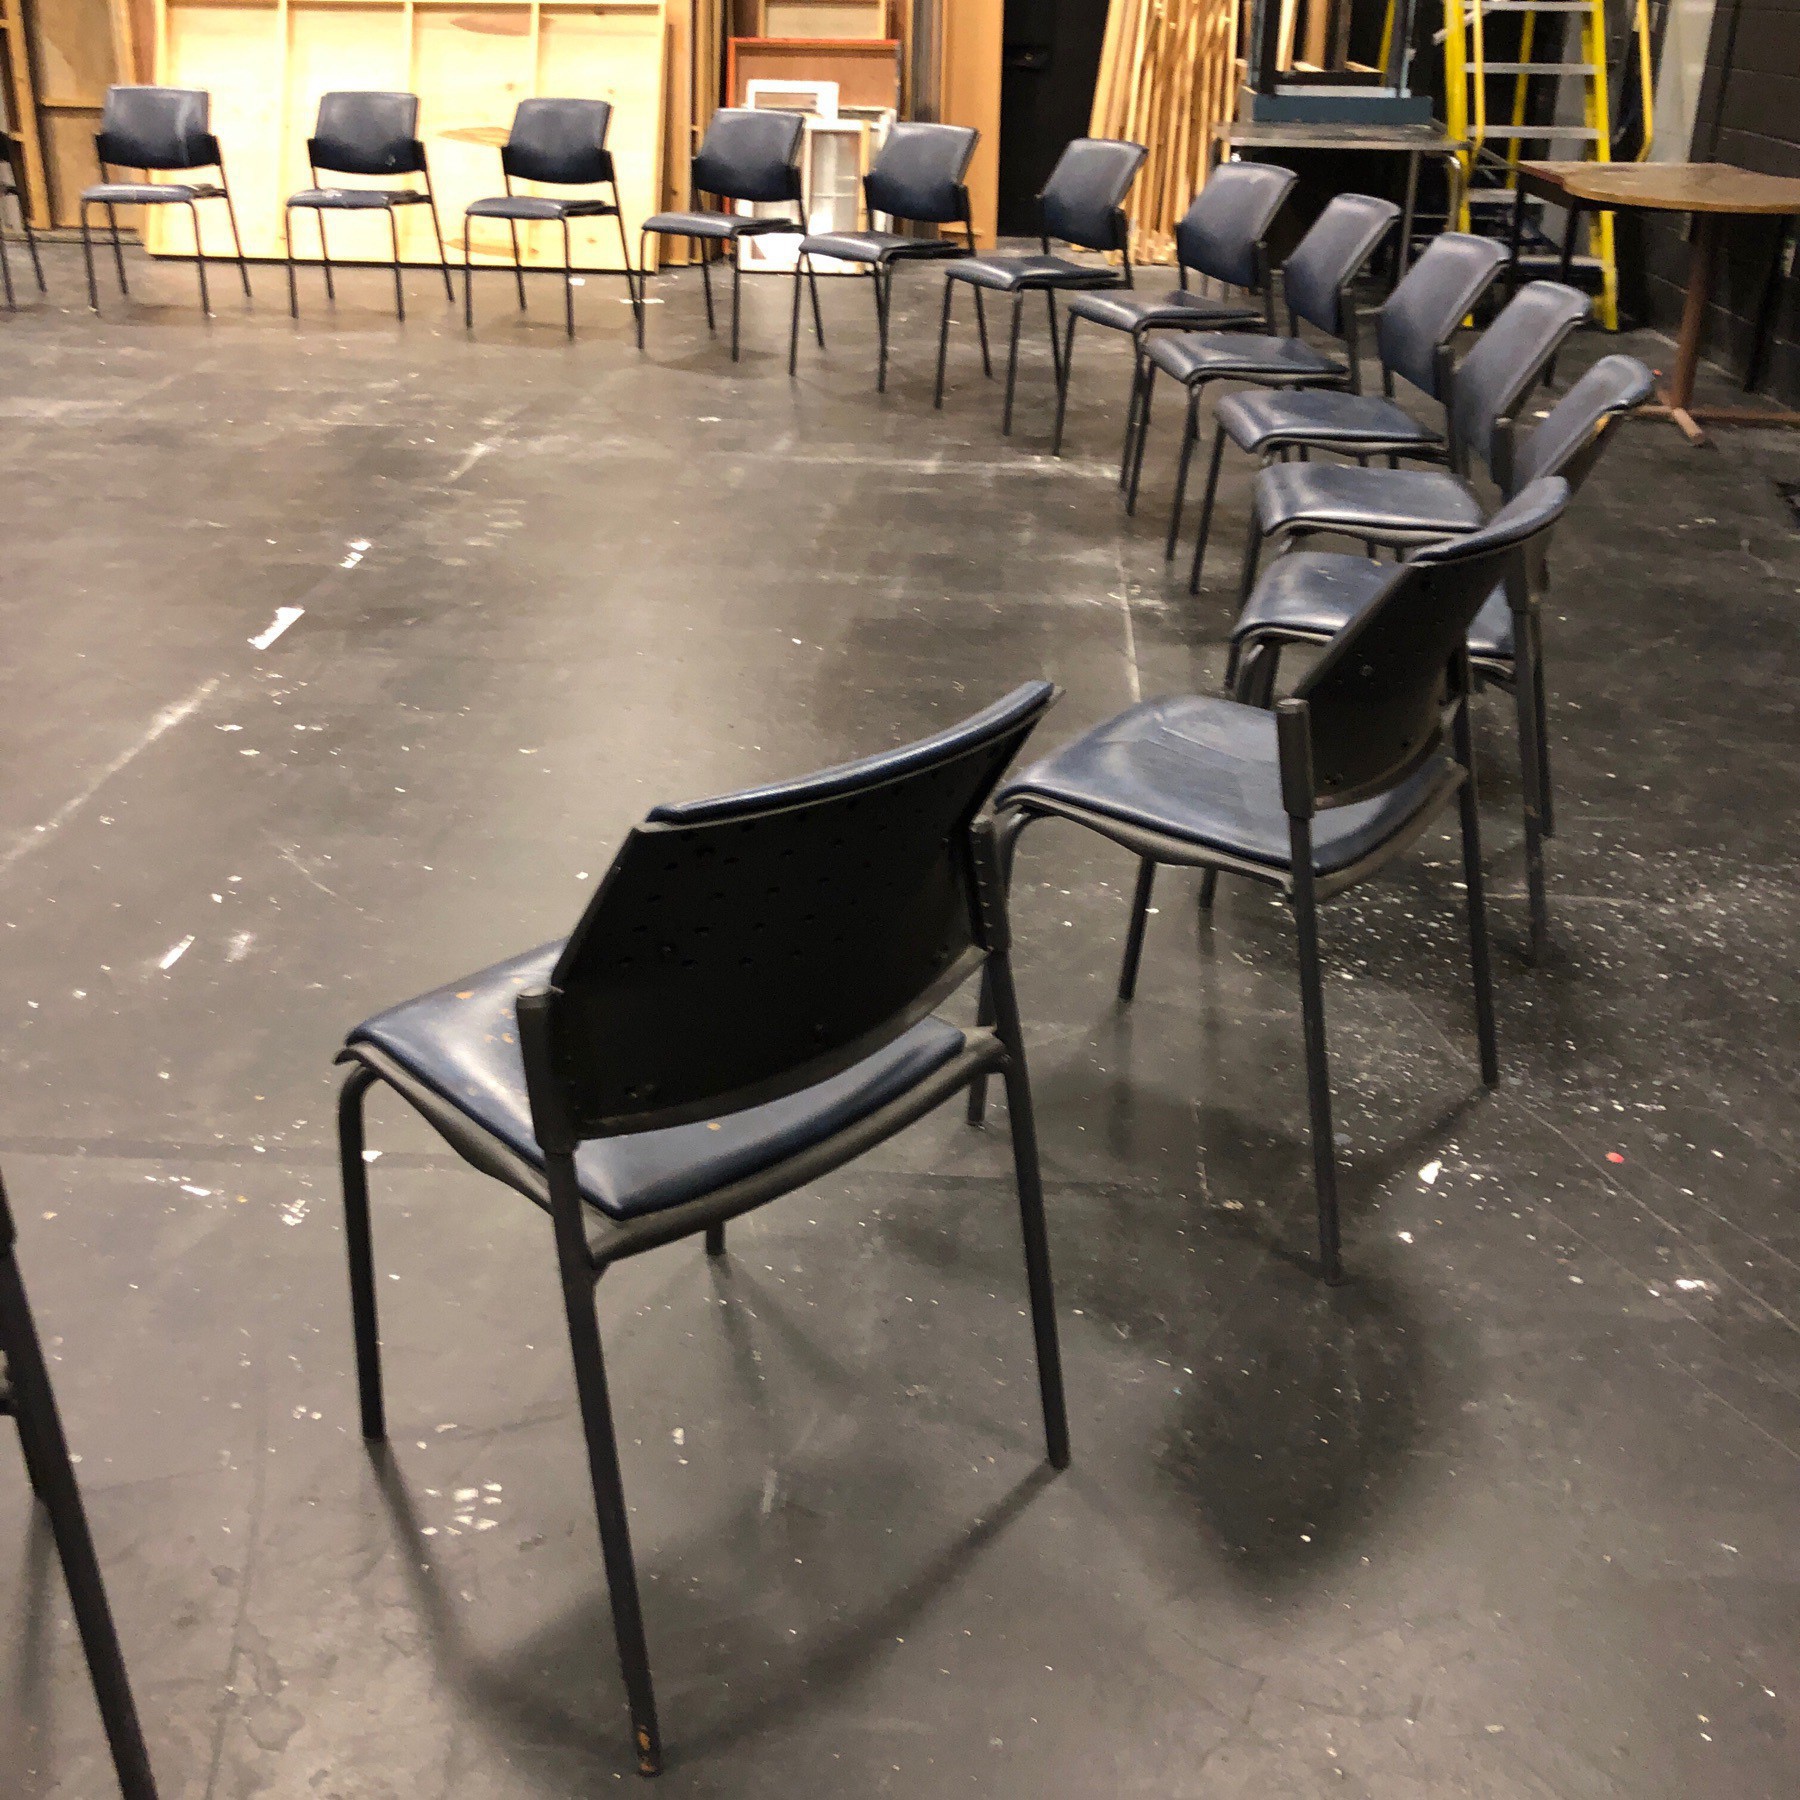 Chairs is semicircle in film studio.